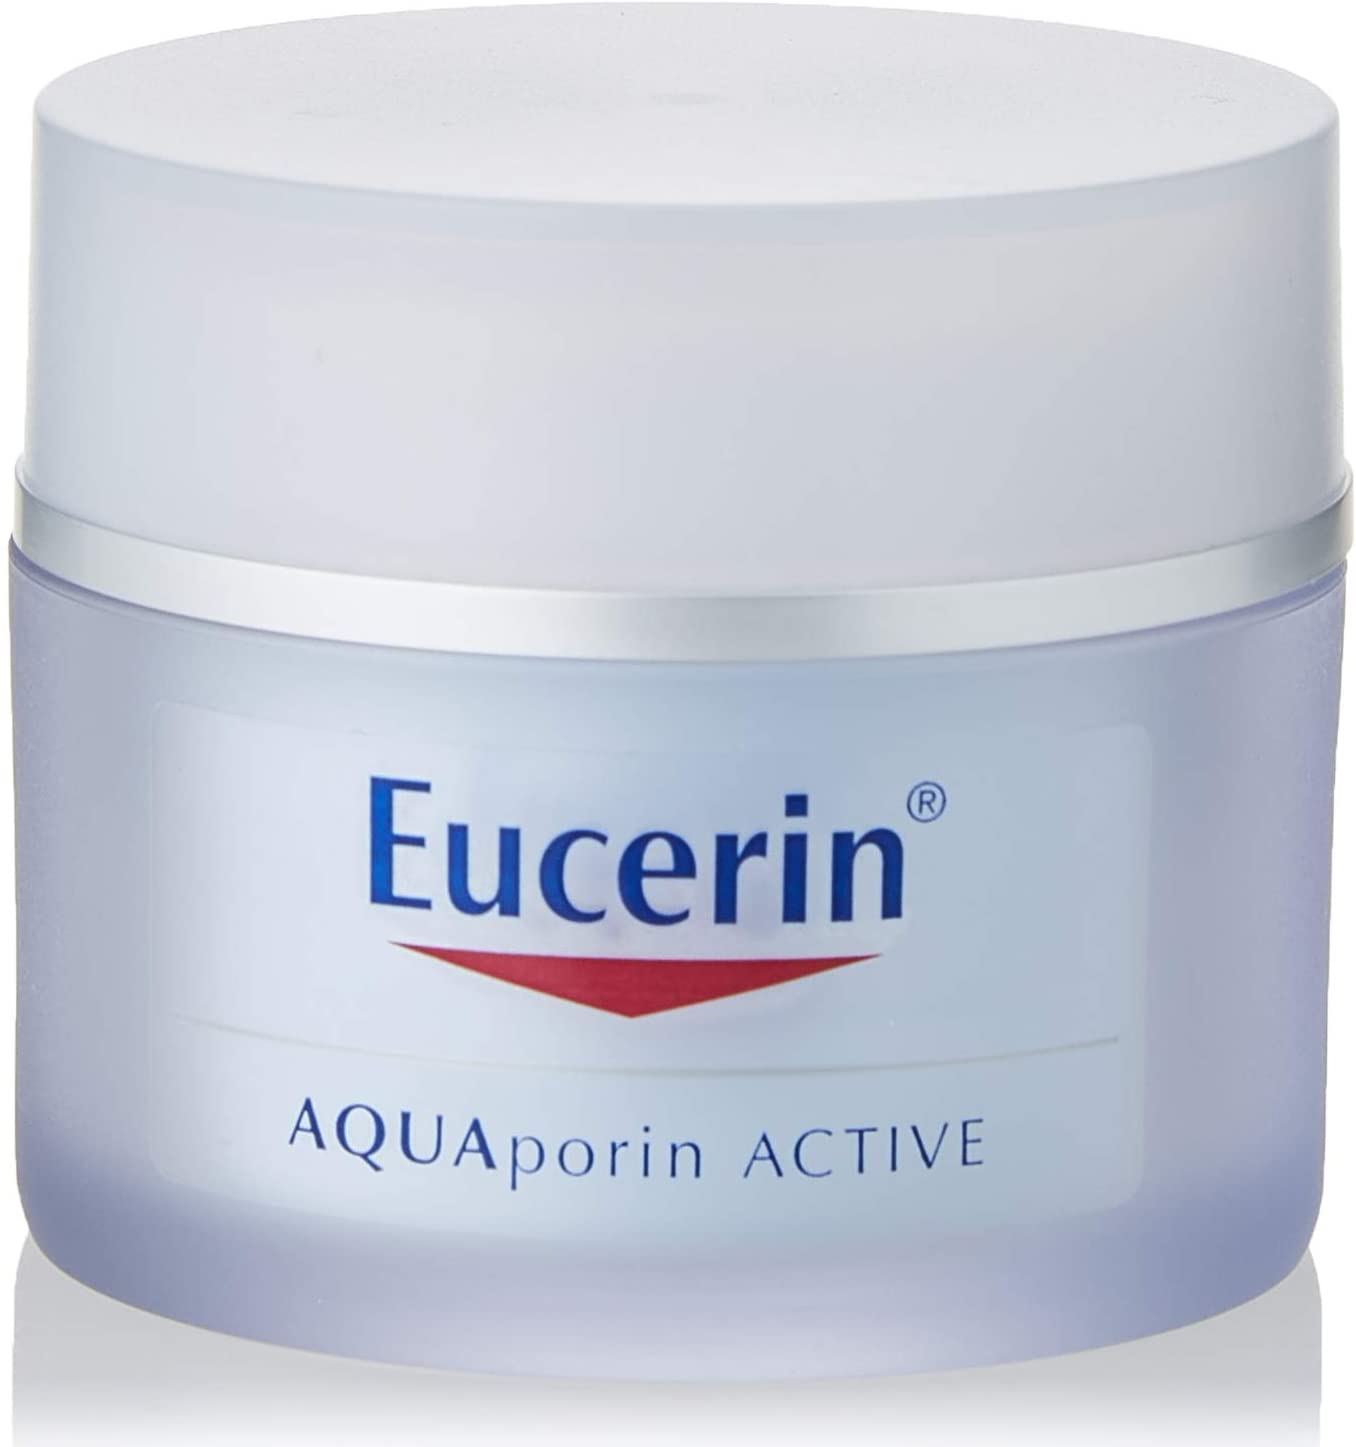 Eucerin AQUAporin 10961350 Active Cream for Normal to Combination Skin 50 ml